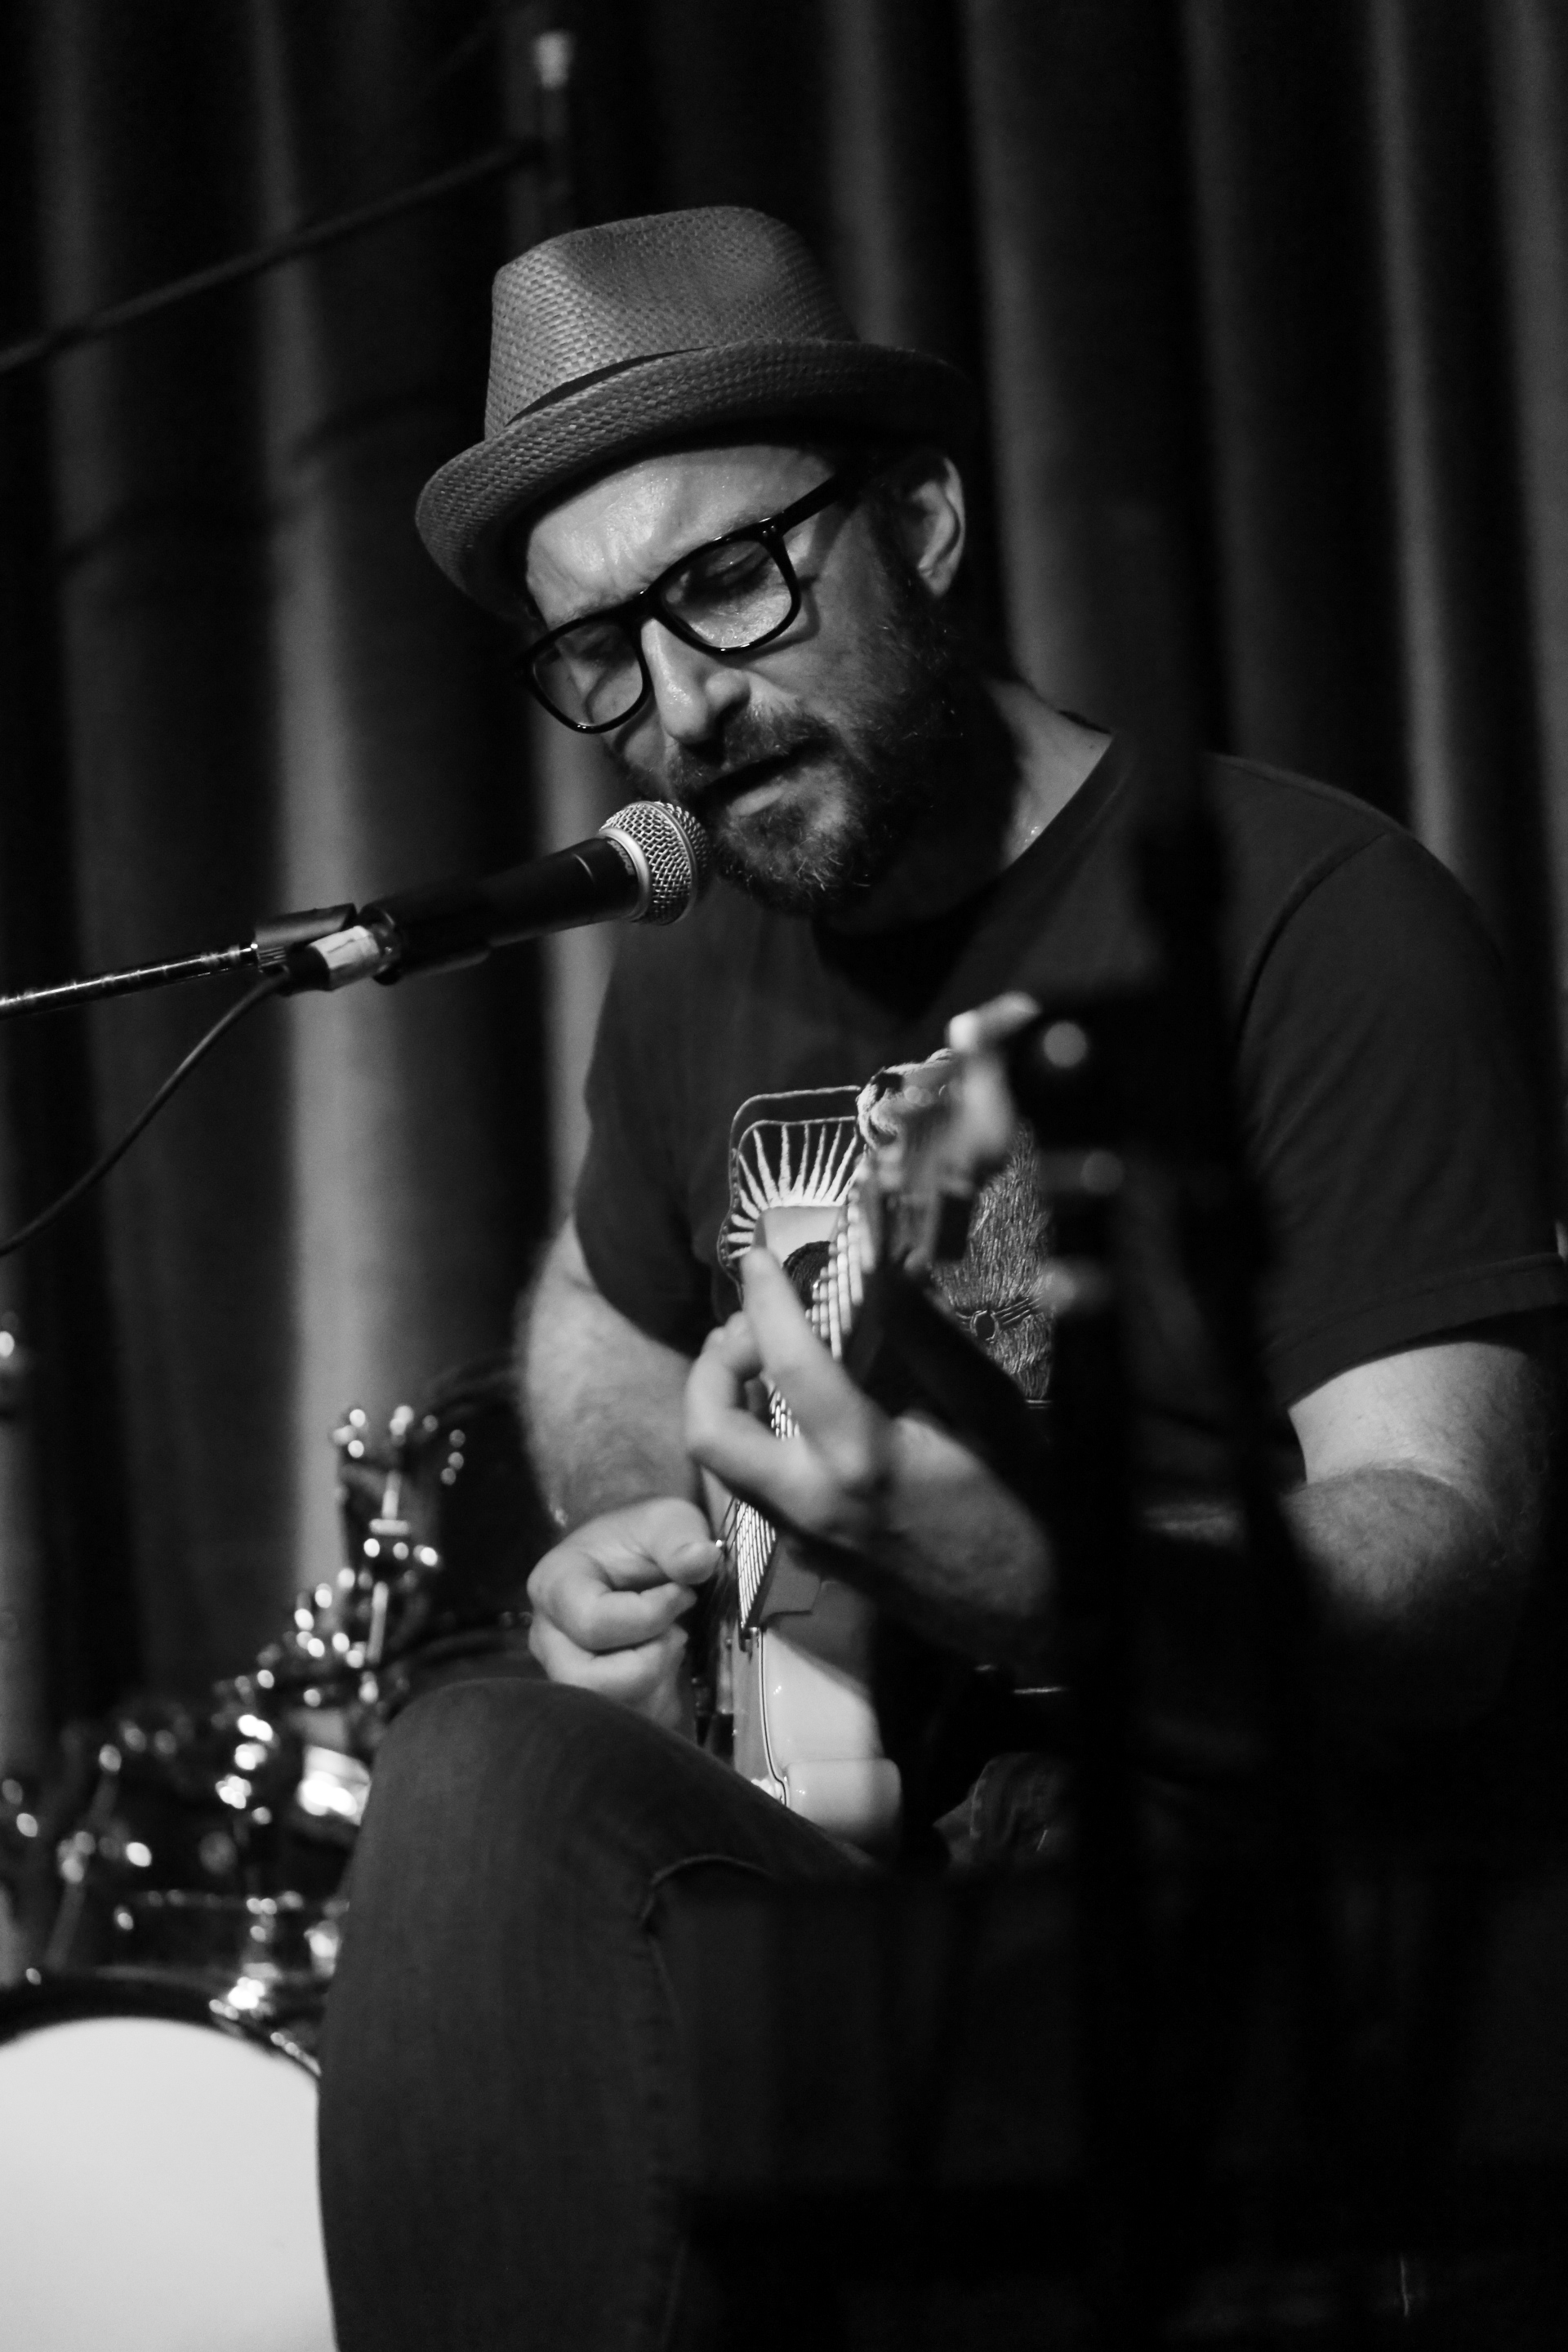 Mike Vitale live at Hotel Cafe on July 2nd 2018